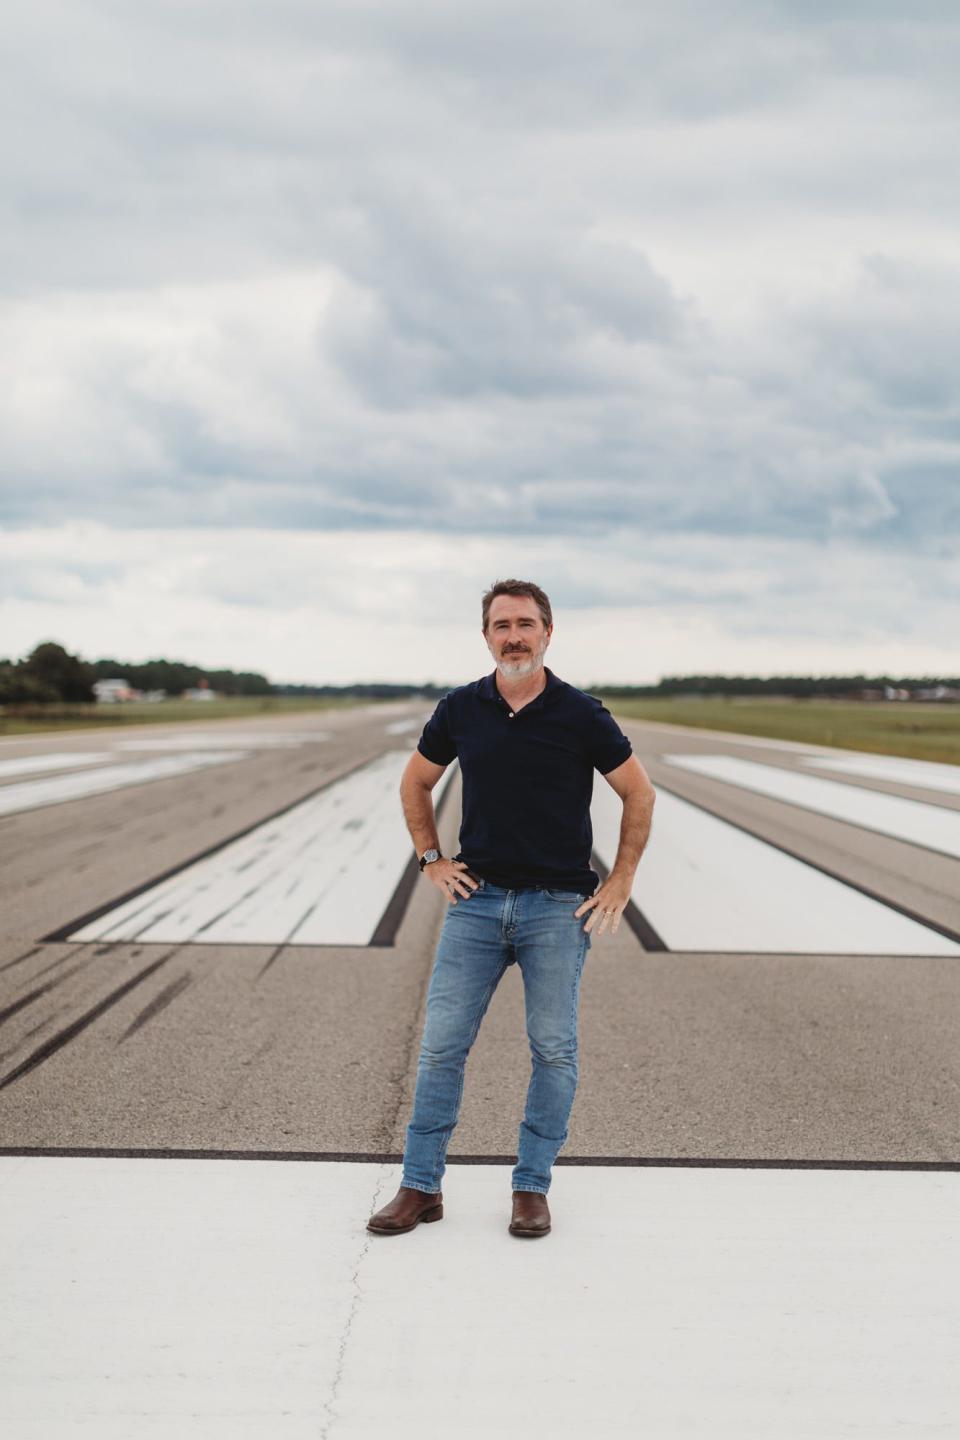 Wilmington-based writer Wiley Cash at the Cape Fear Regional Jetport in Oak Island, which plays a big part in his fourth novel, "When Ghosts Come Home." The character-driven mystery was released Sept. 21.